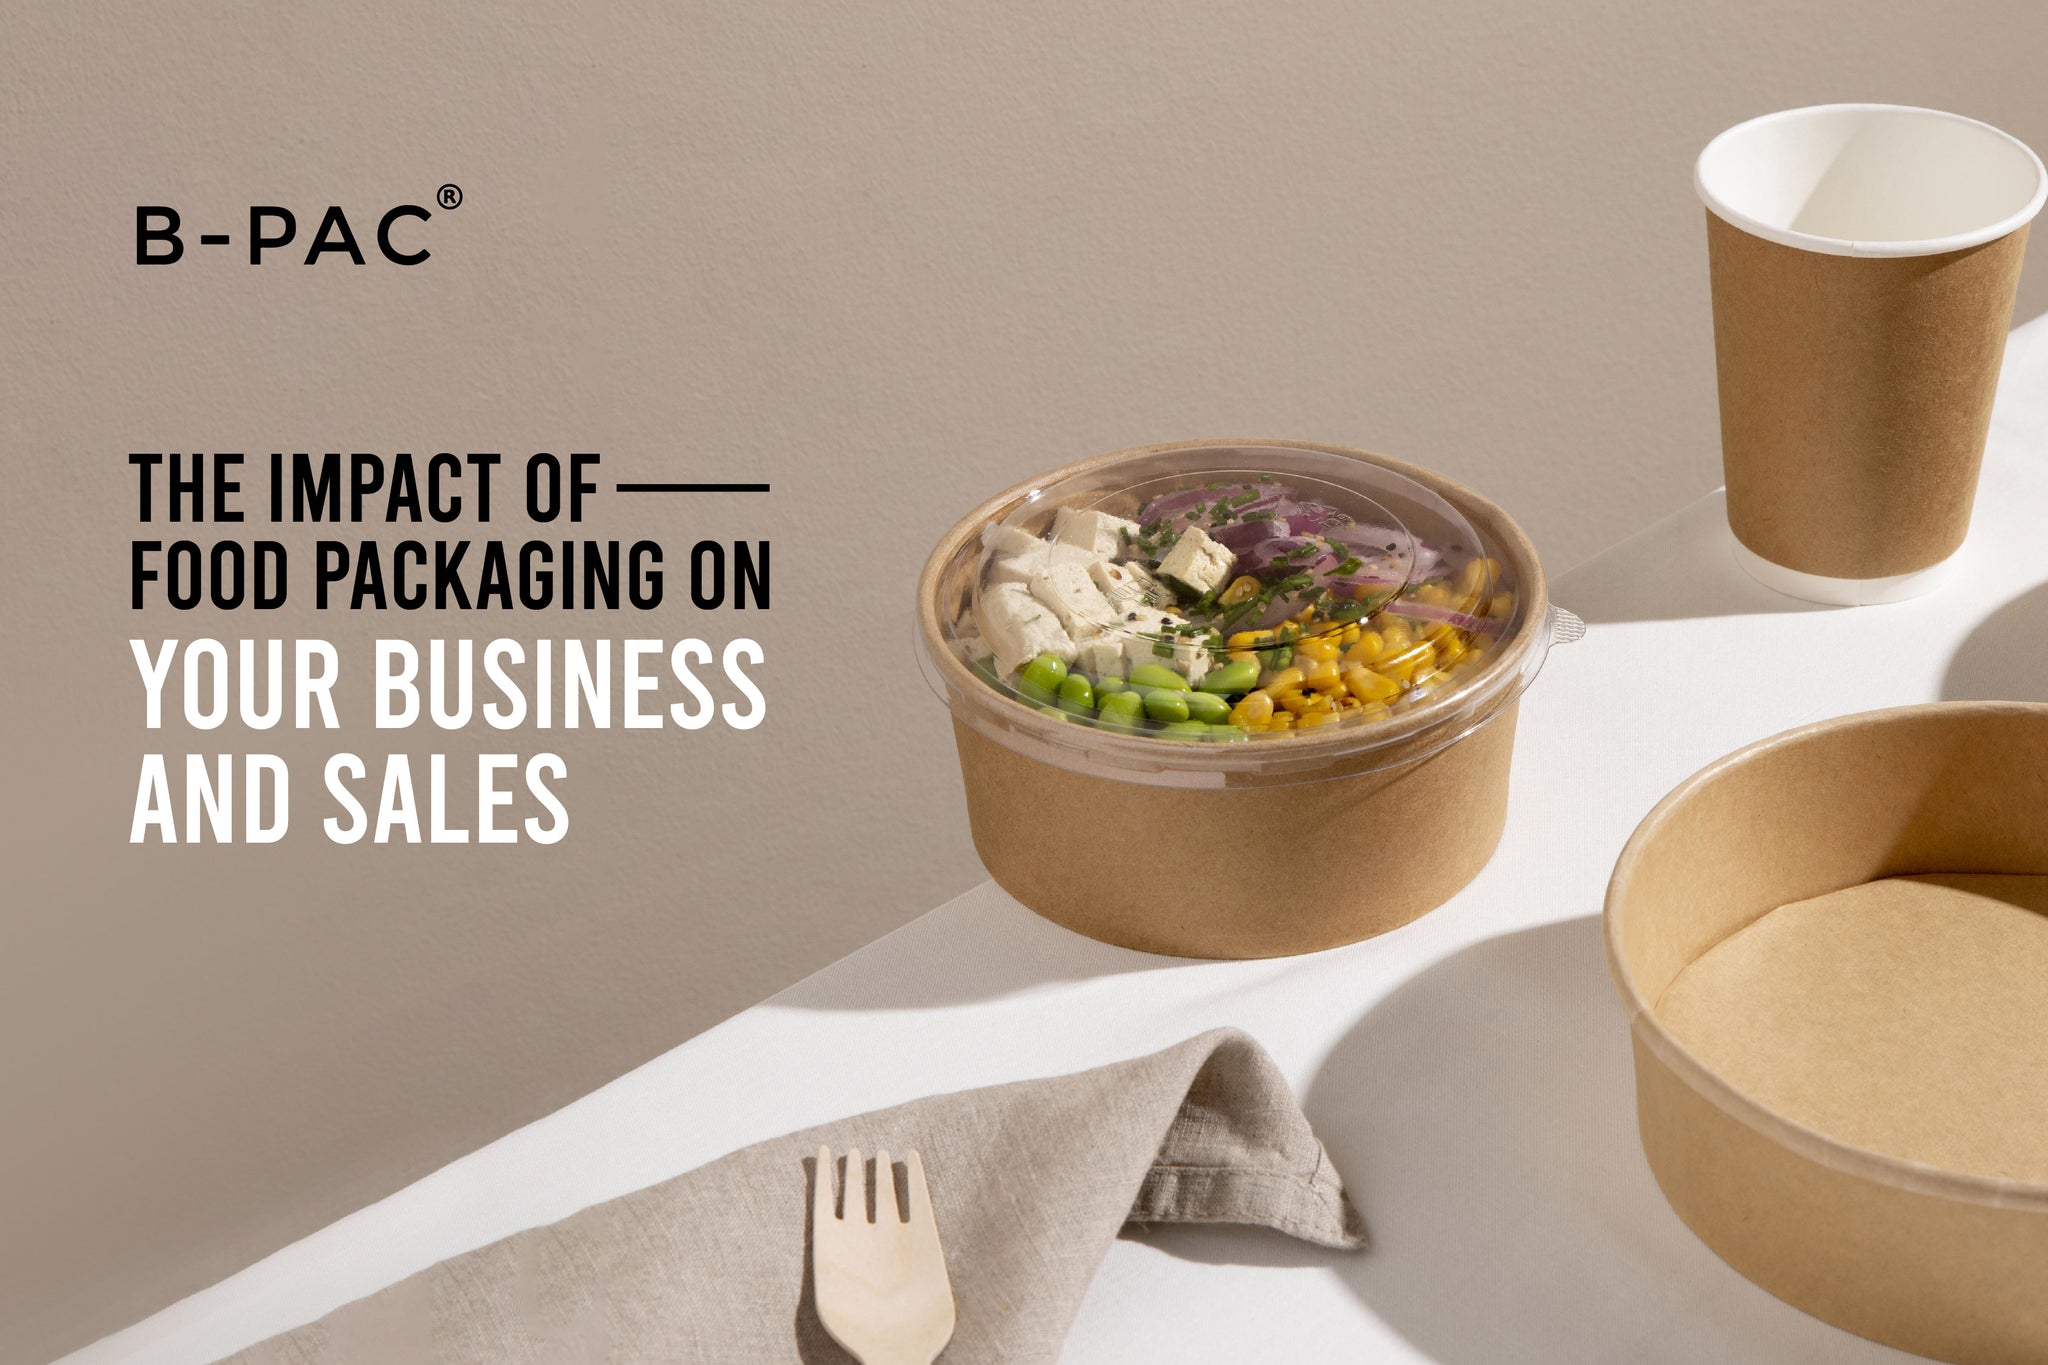 The Impact of Food Packaging on Your Business and Sales